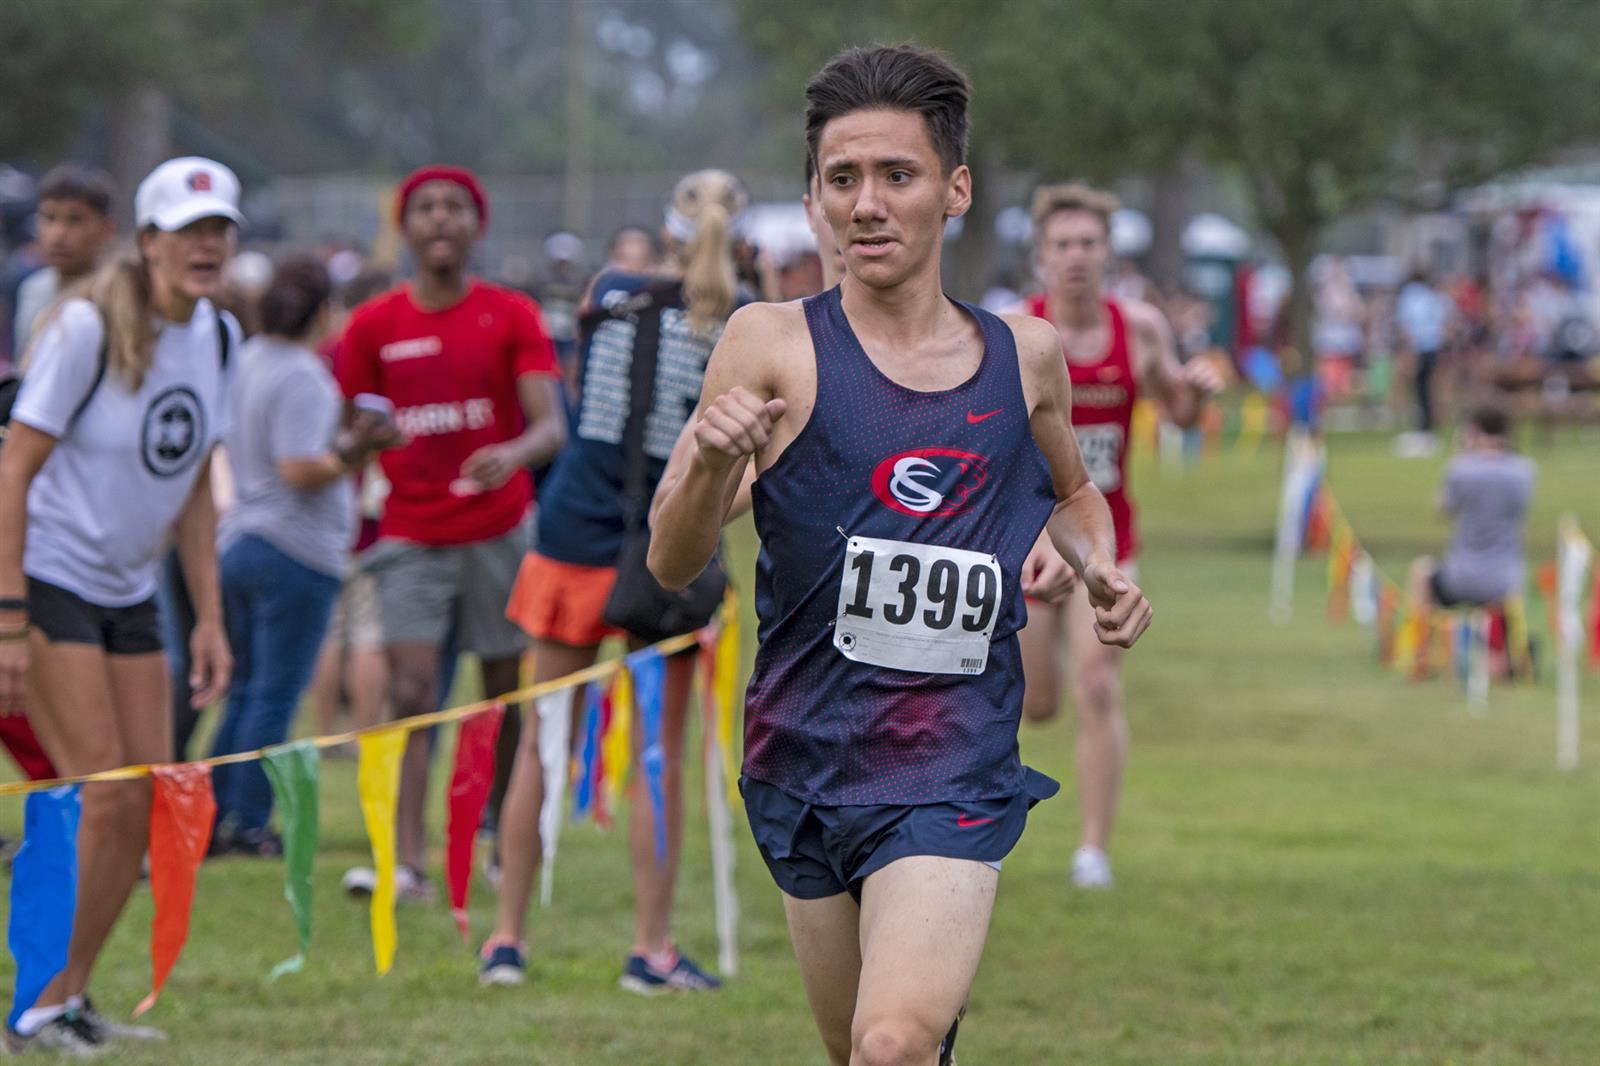 Cypress Springs sophomore Manuel Vela finished 76th overall in his first appearance at the UIL Cross Country State Meet.